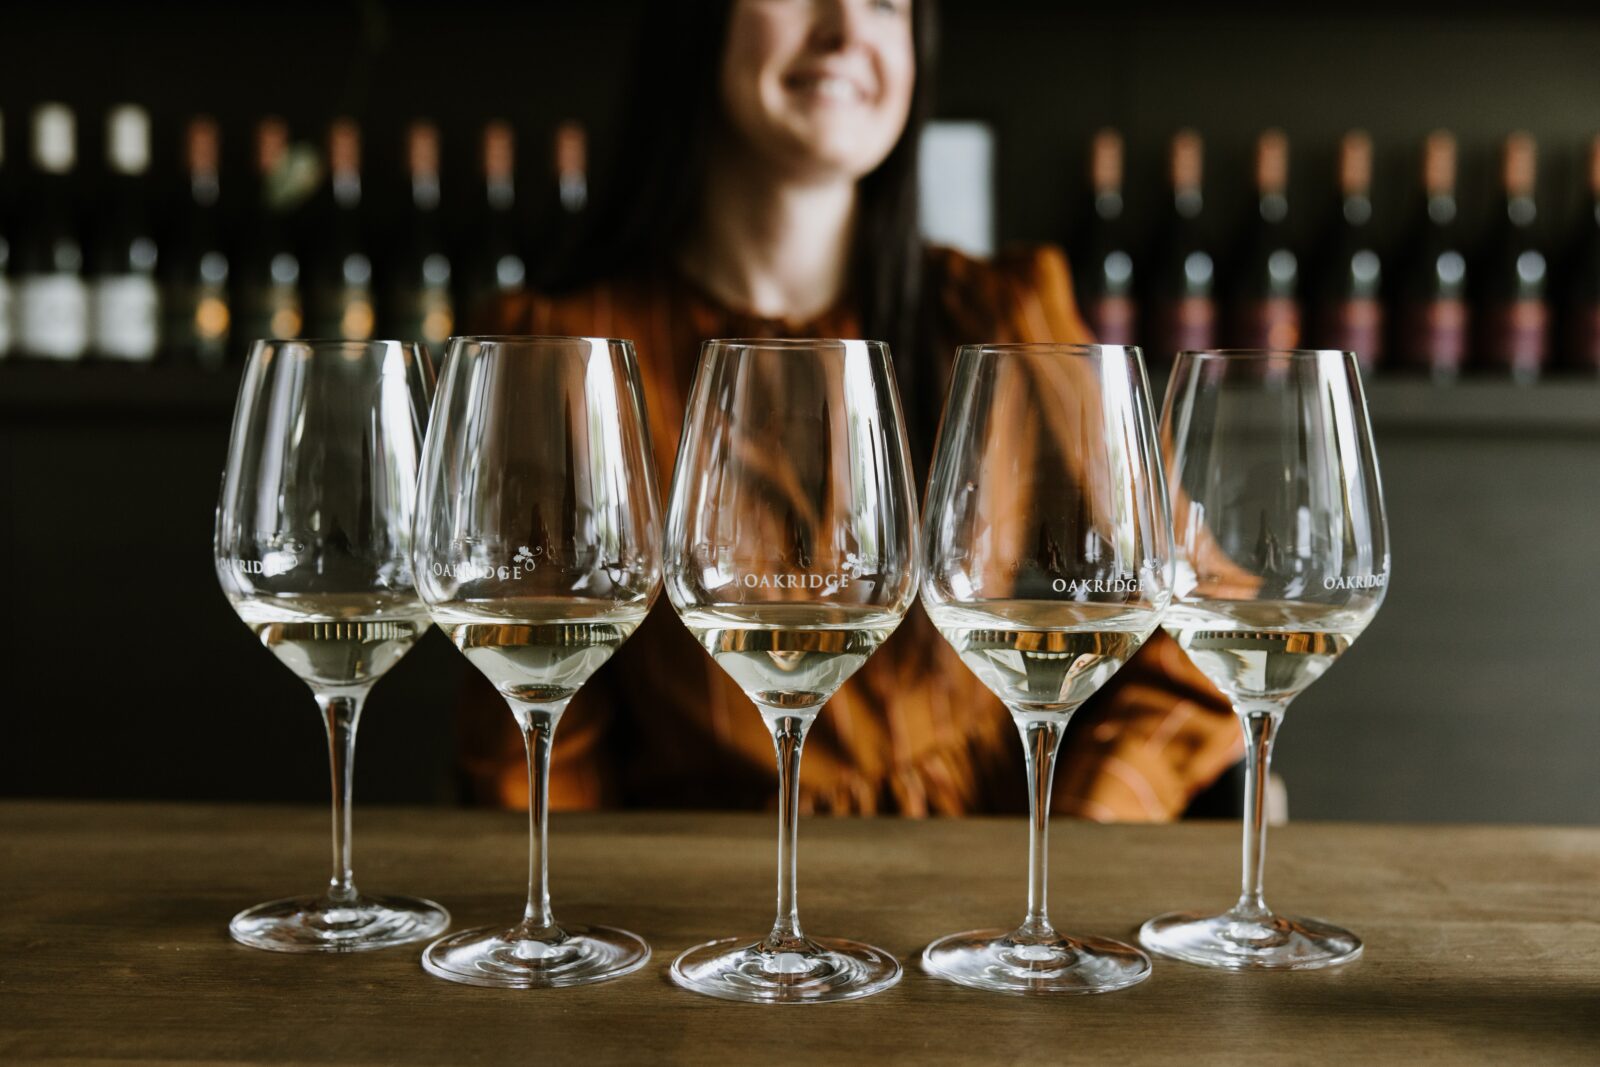 5 wine glasses, each with a tasting of chardonnay. A smiling woman can be seen in the background.